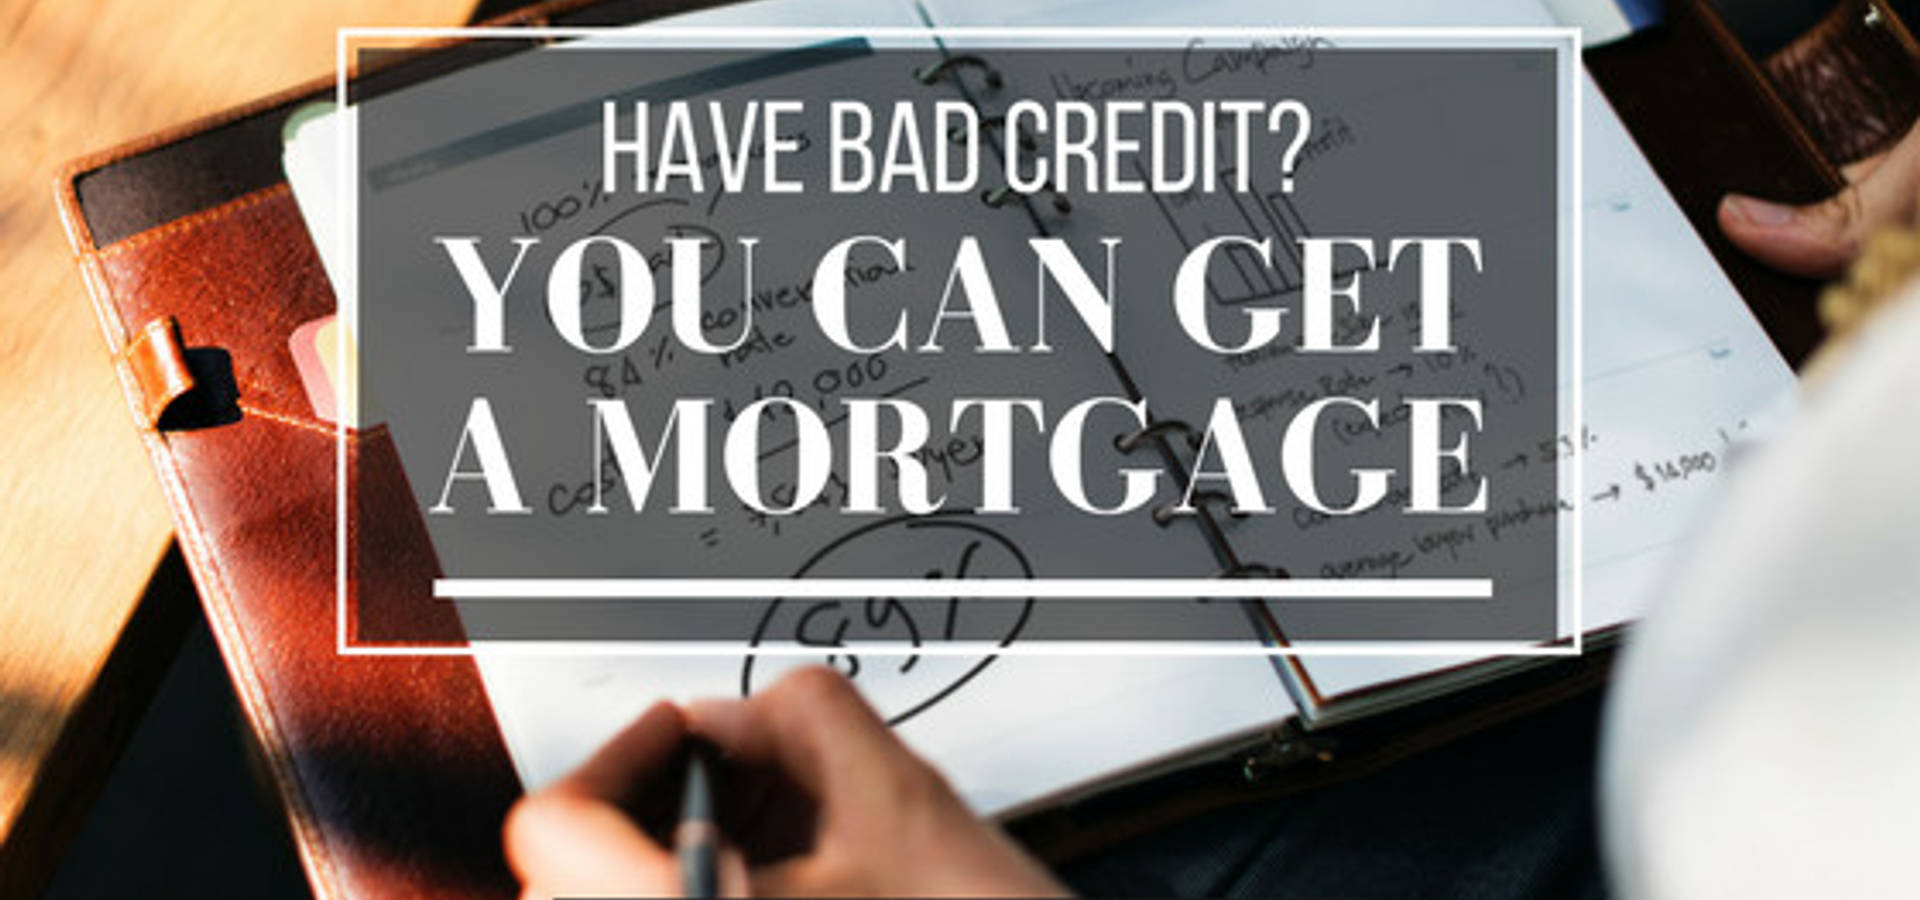 how to get mortgage with bad credit